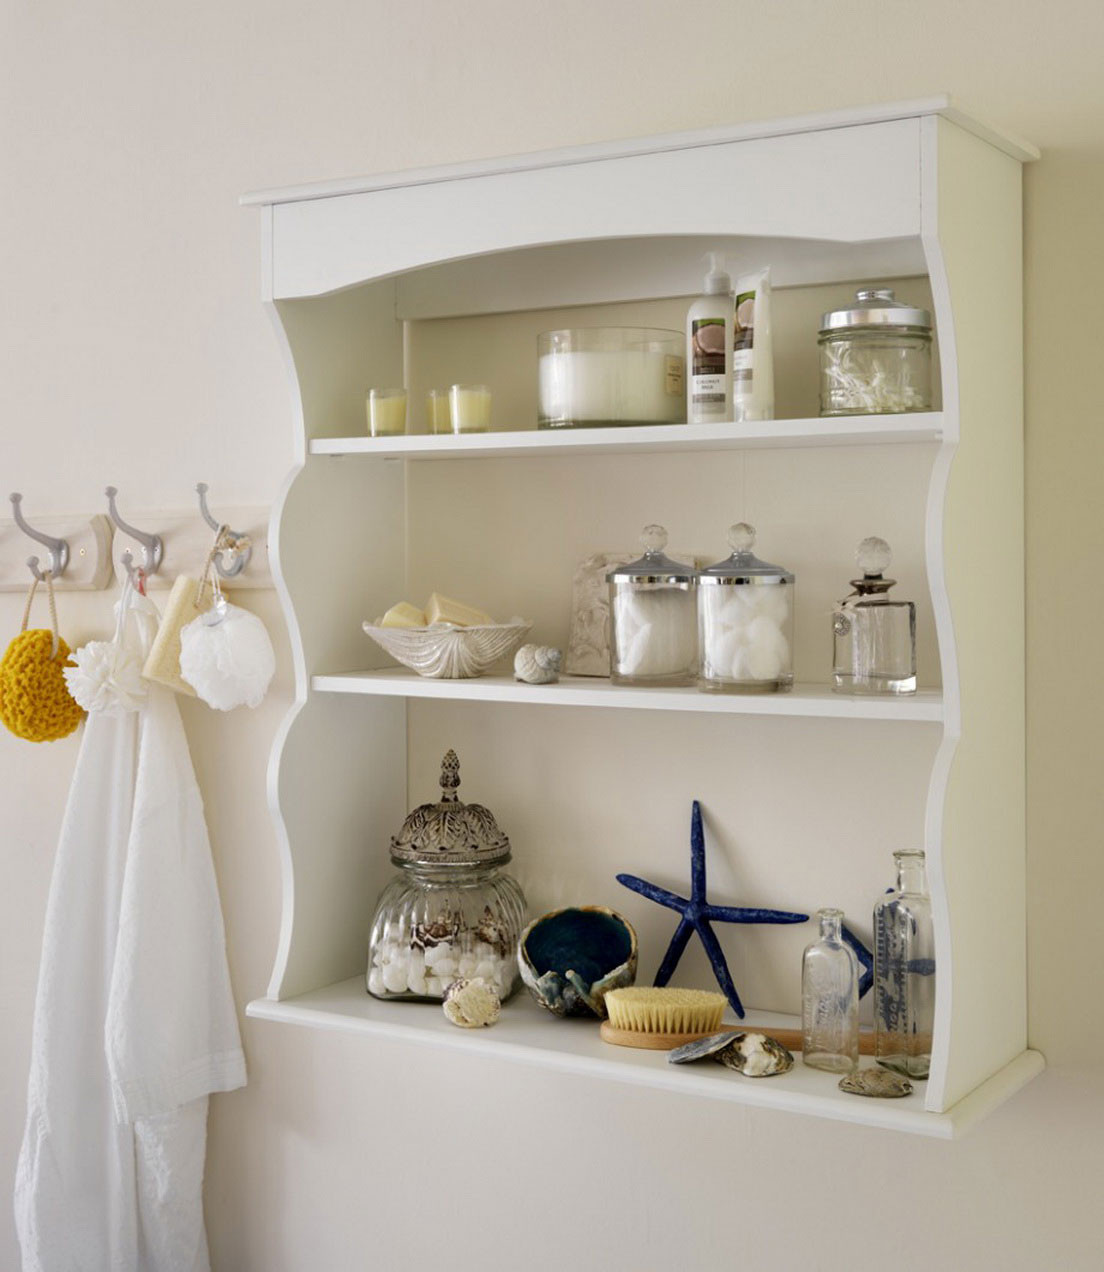 Kitchen Wall Shelves
 Wall Shelving Ideas for Your Kitchen Storage Solution